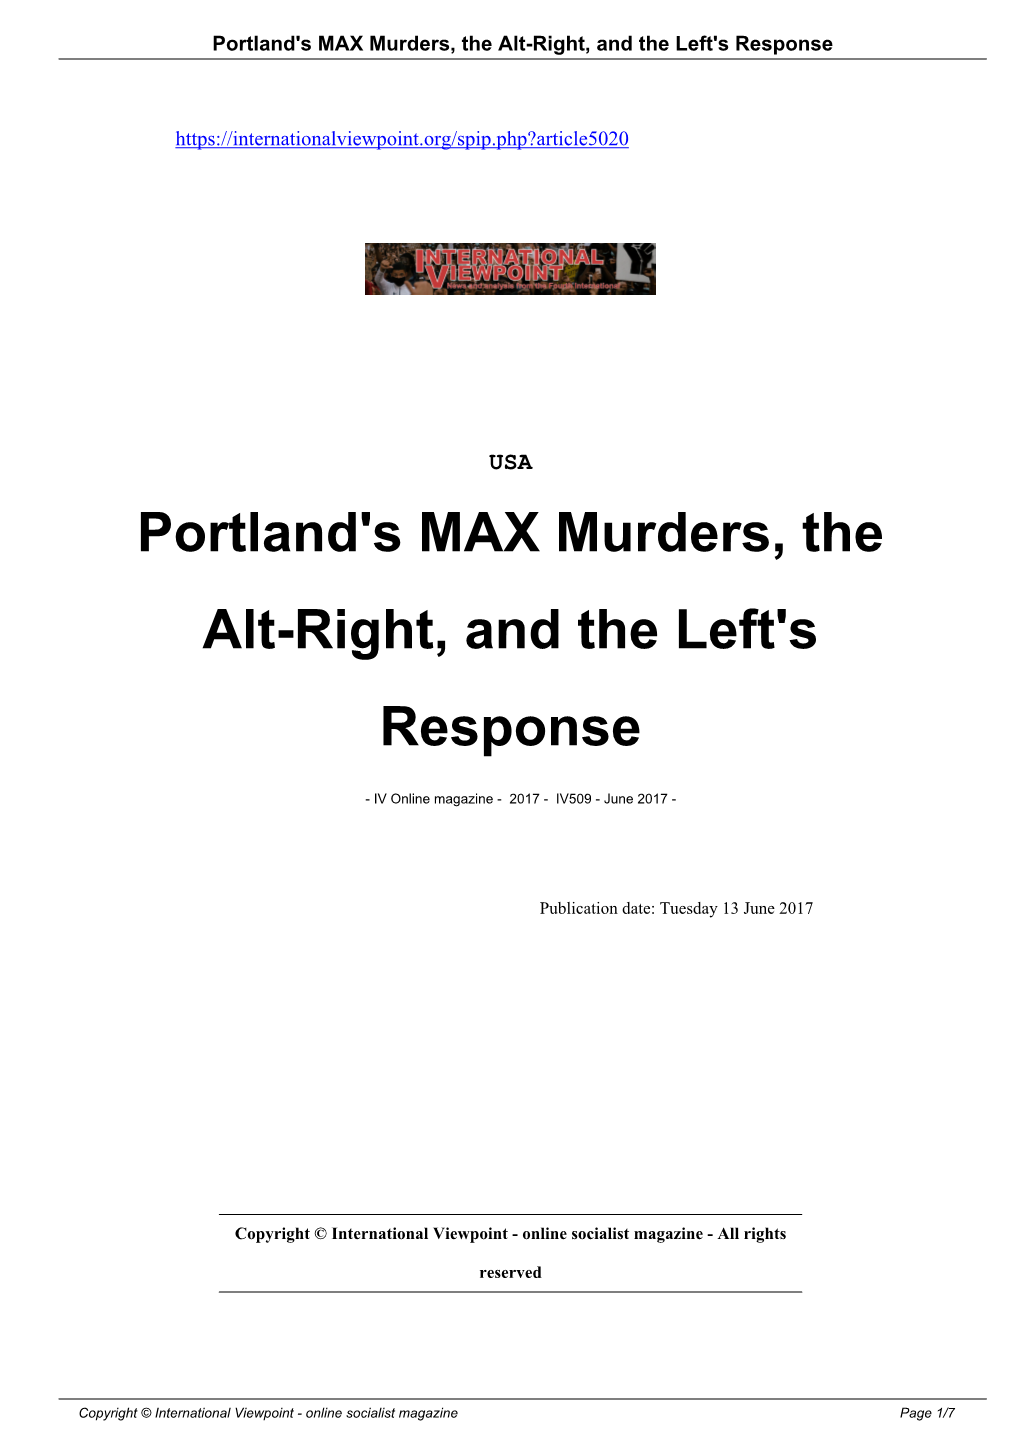 Portland's MAX Murders, the Alt-Right, and the Left's Response